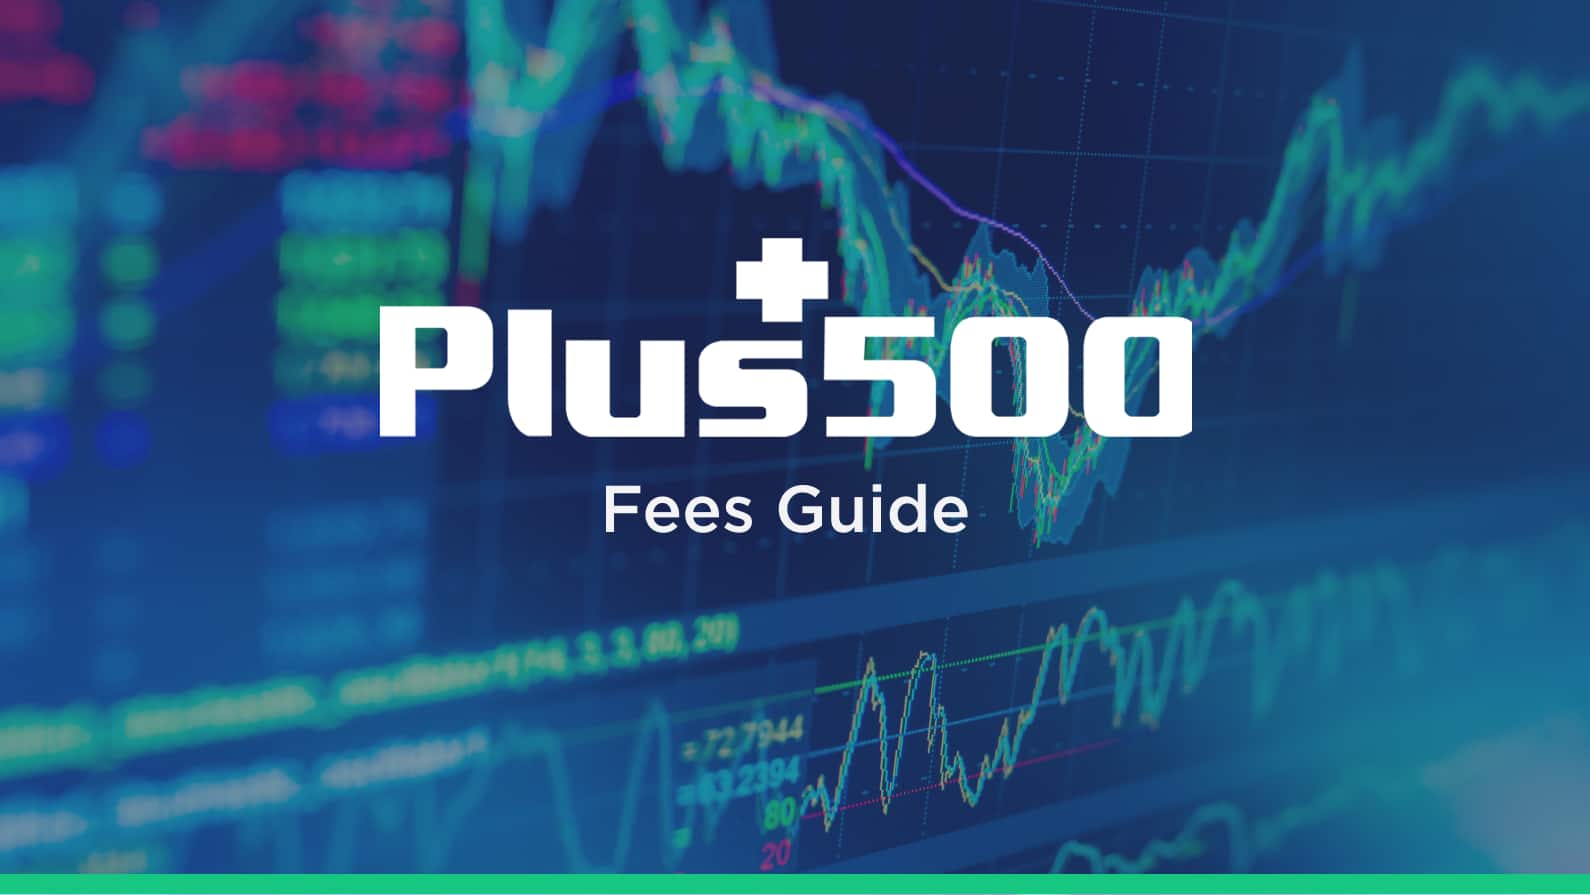 Plus500 Fees – What Can You Expect?